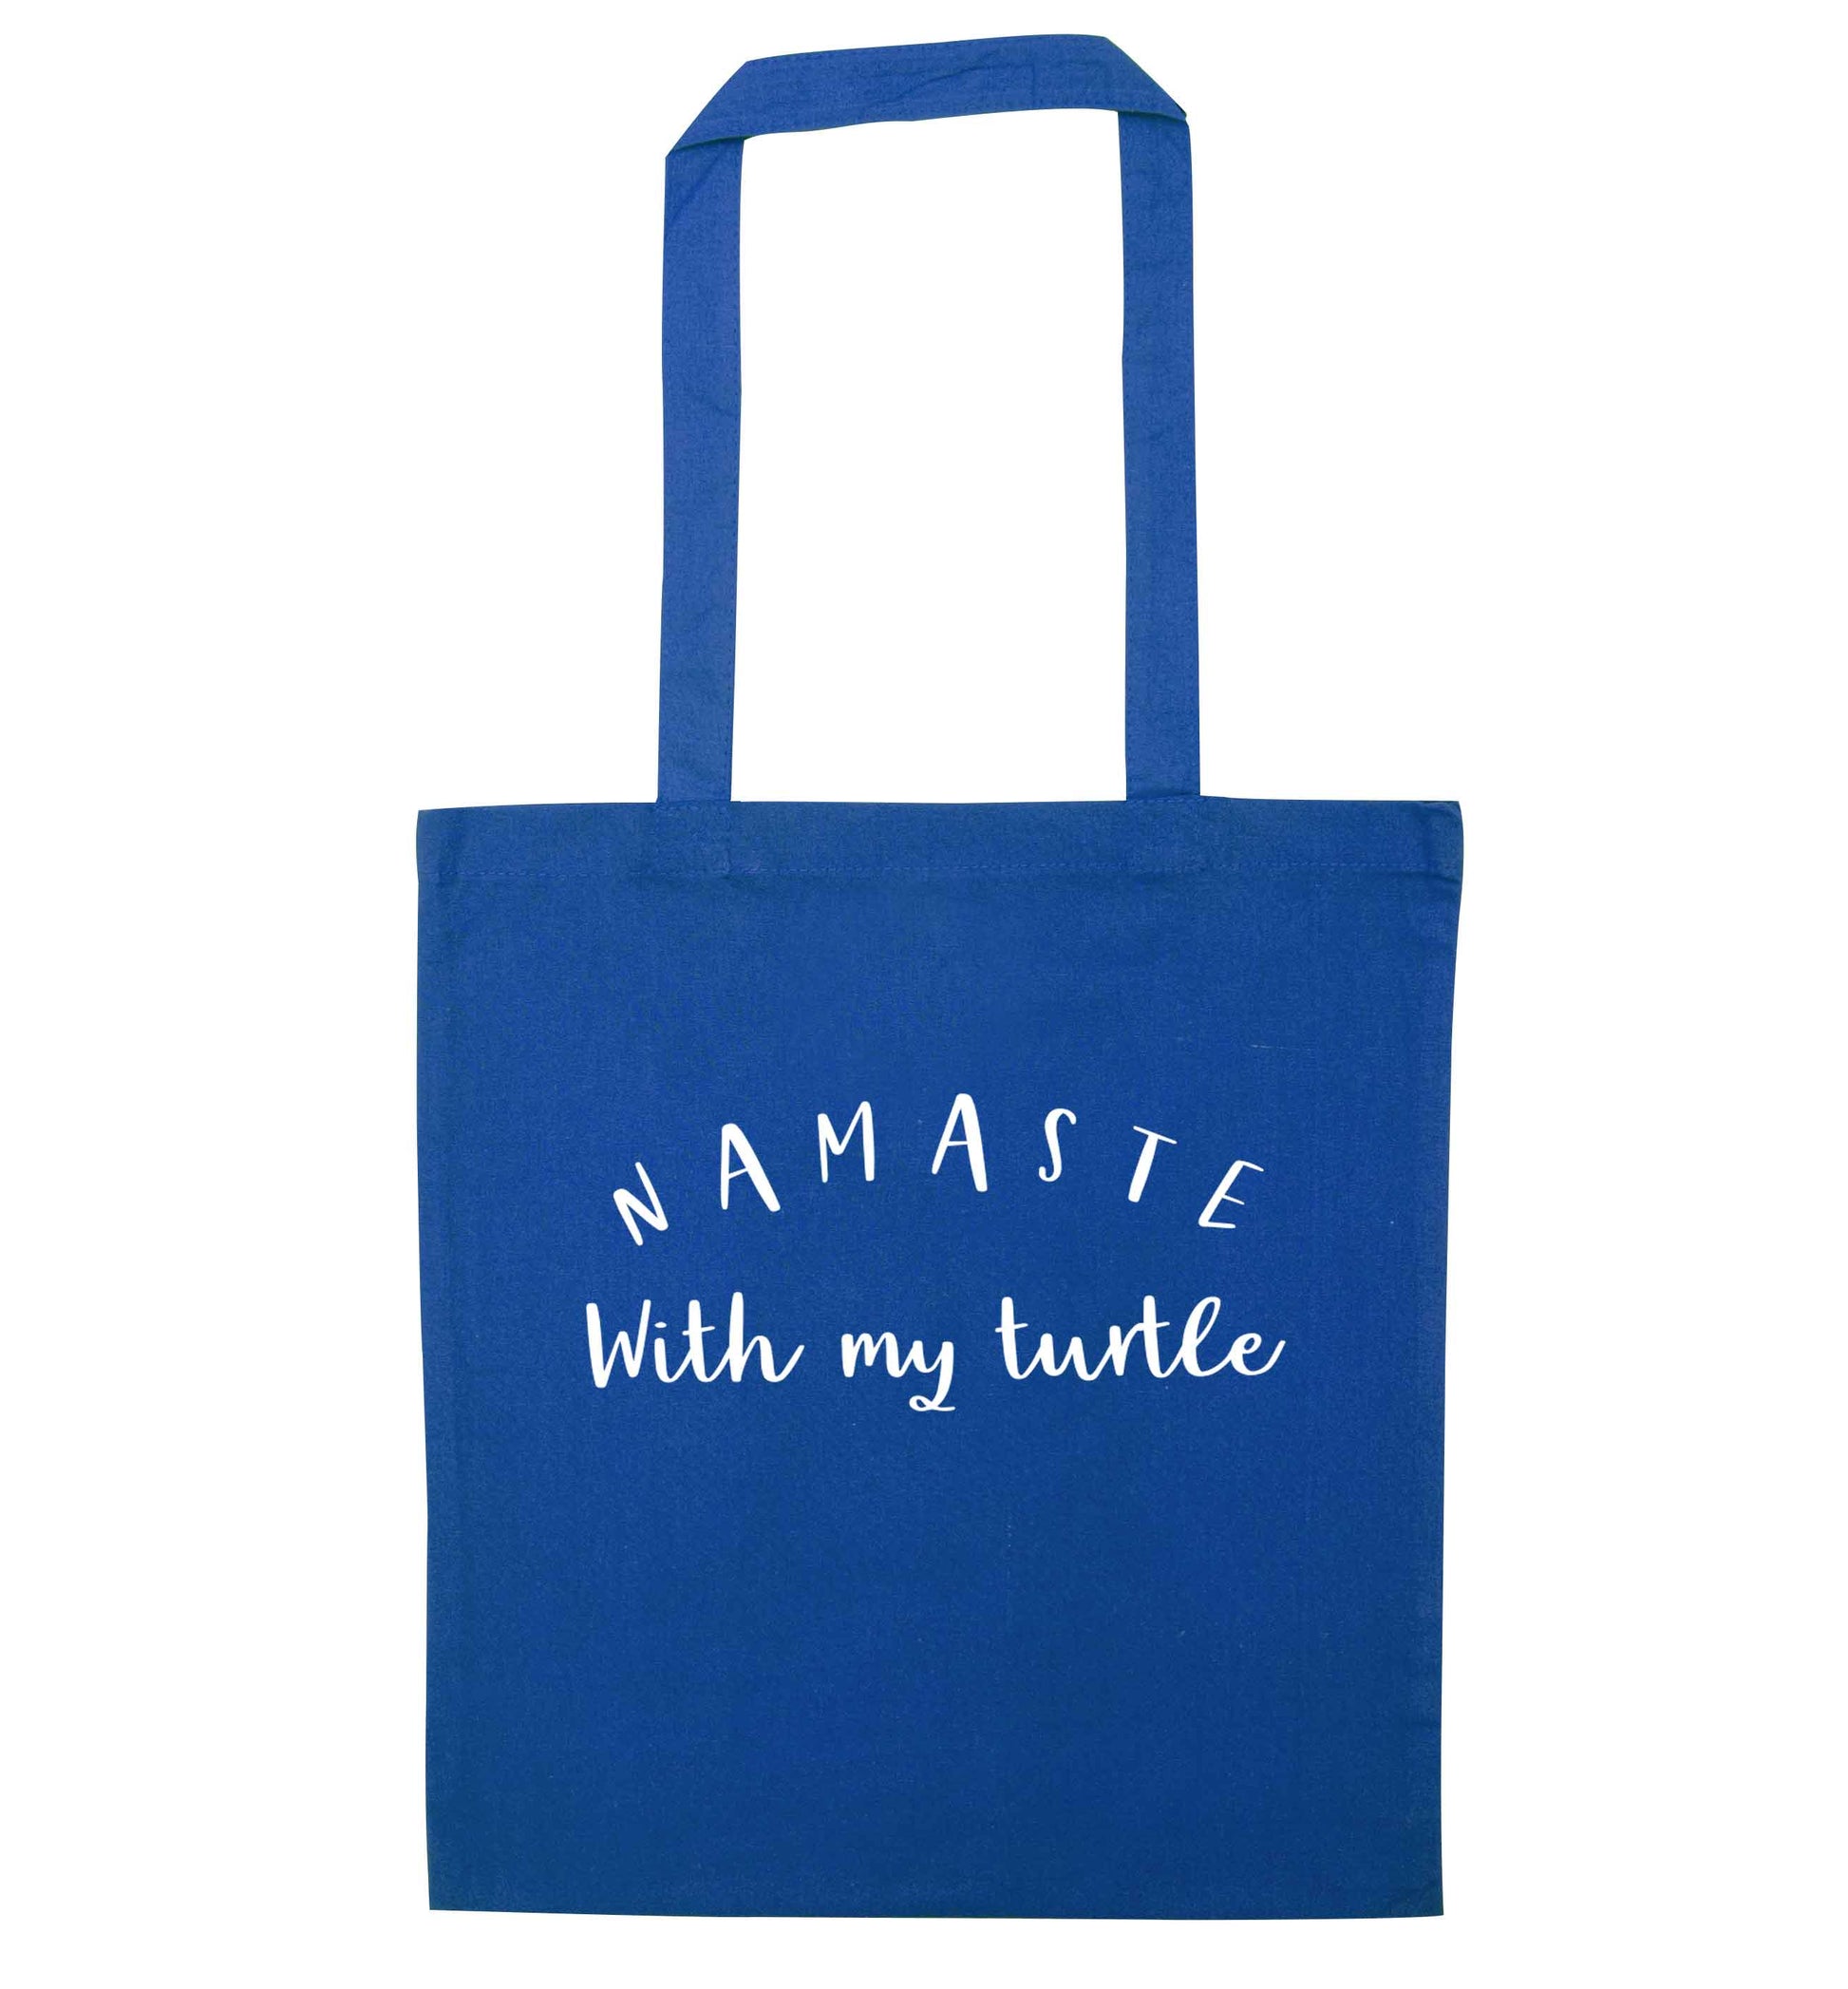 Namaste with my turtle blue tote bag